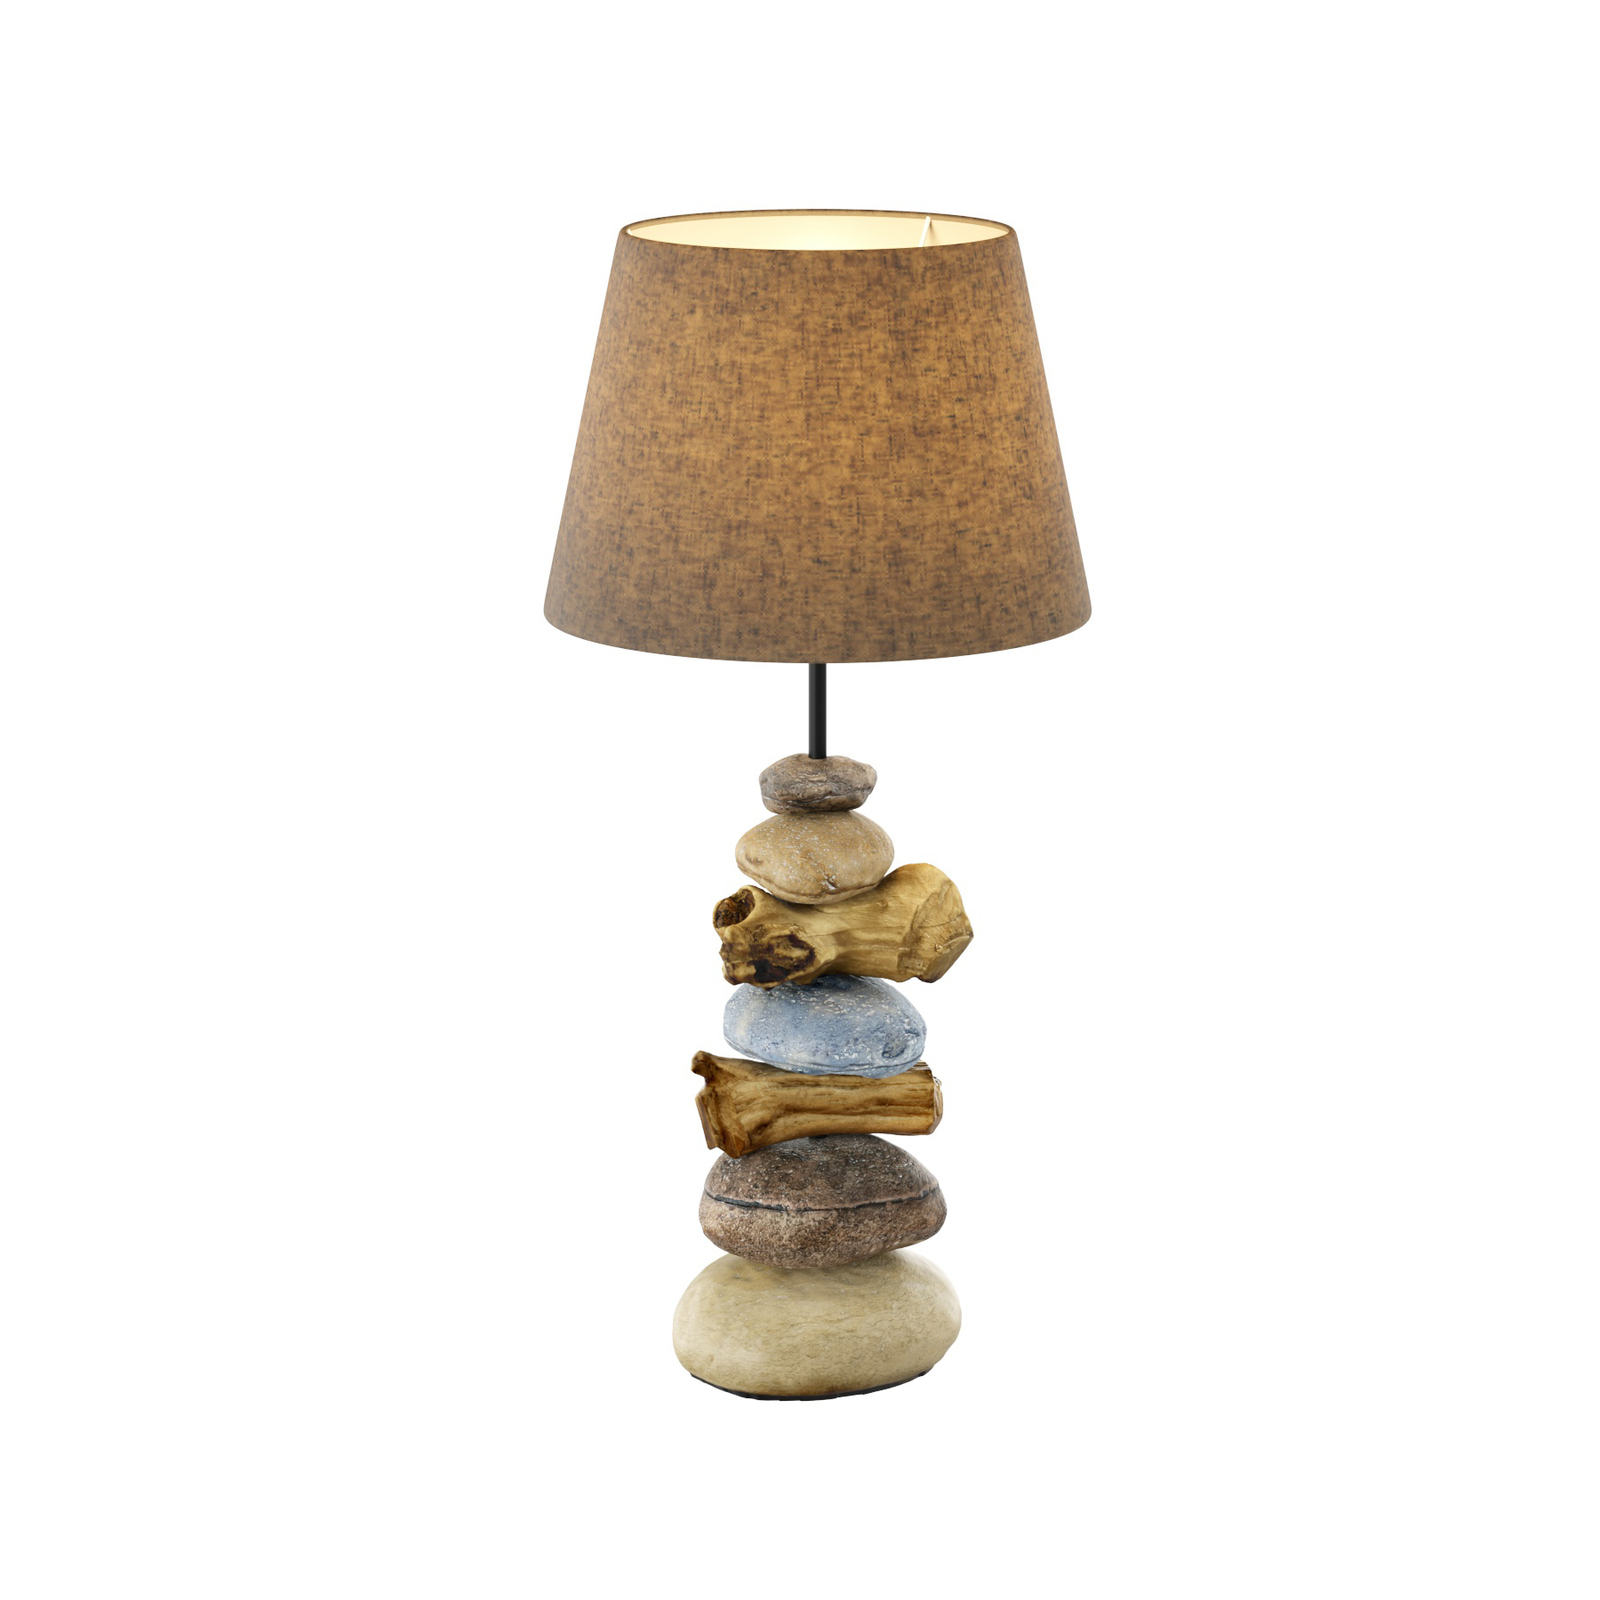 Vera table lamp, fabric lampshade and stones 55 cm